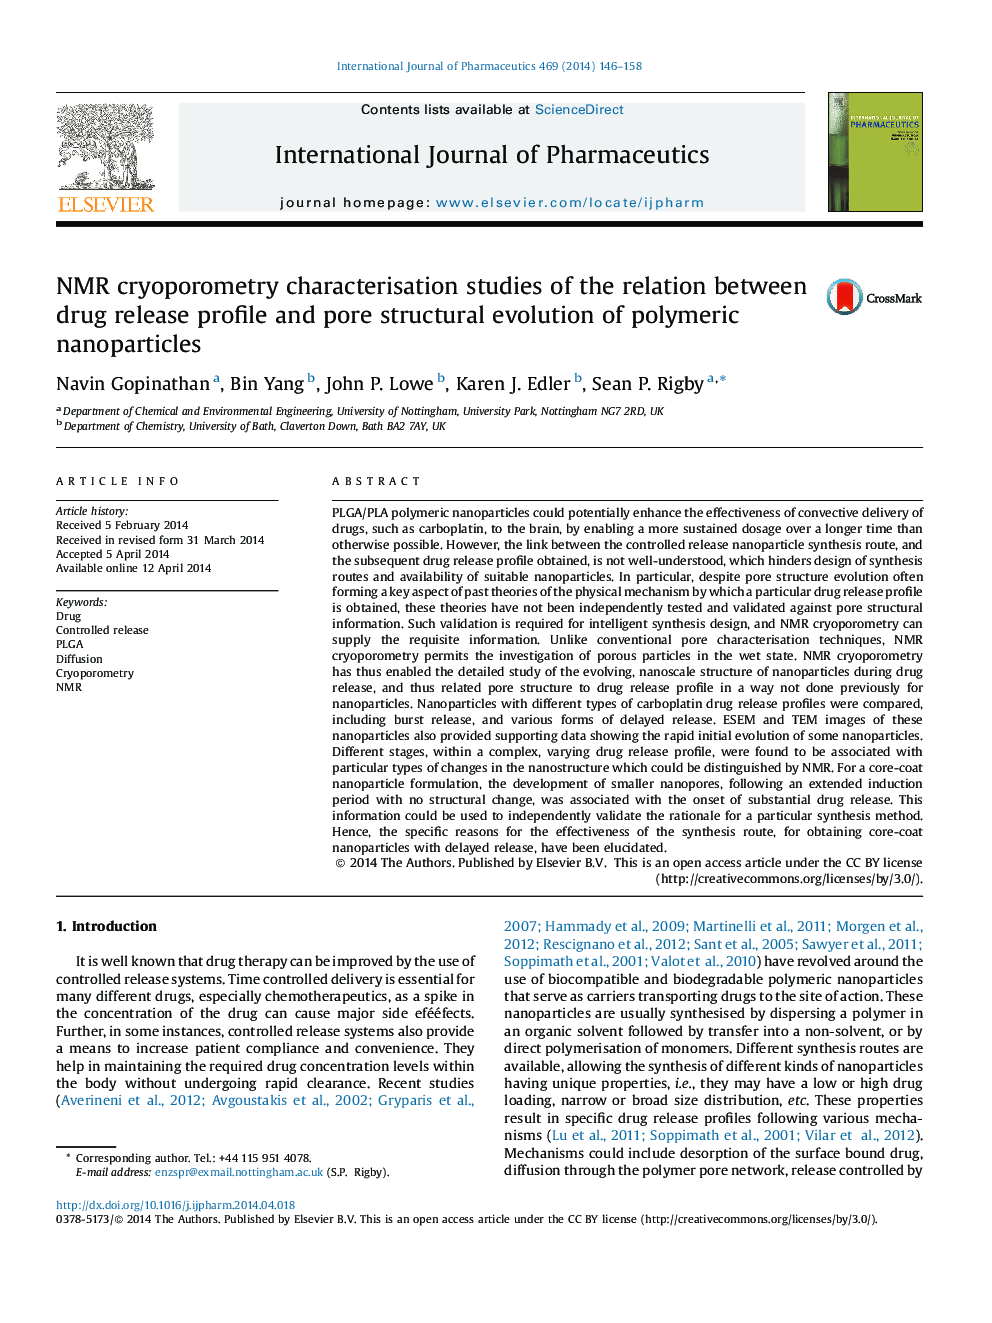 NMR cryoporometry characterisation studies of the relation between drug release profile and pore structural evolution of polymeric nanoparticles